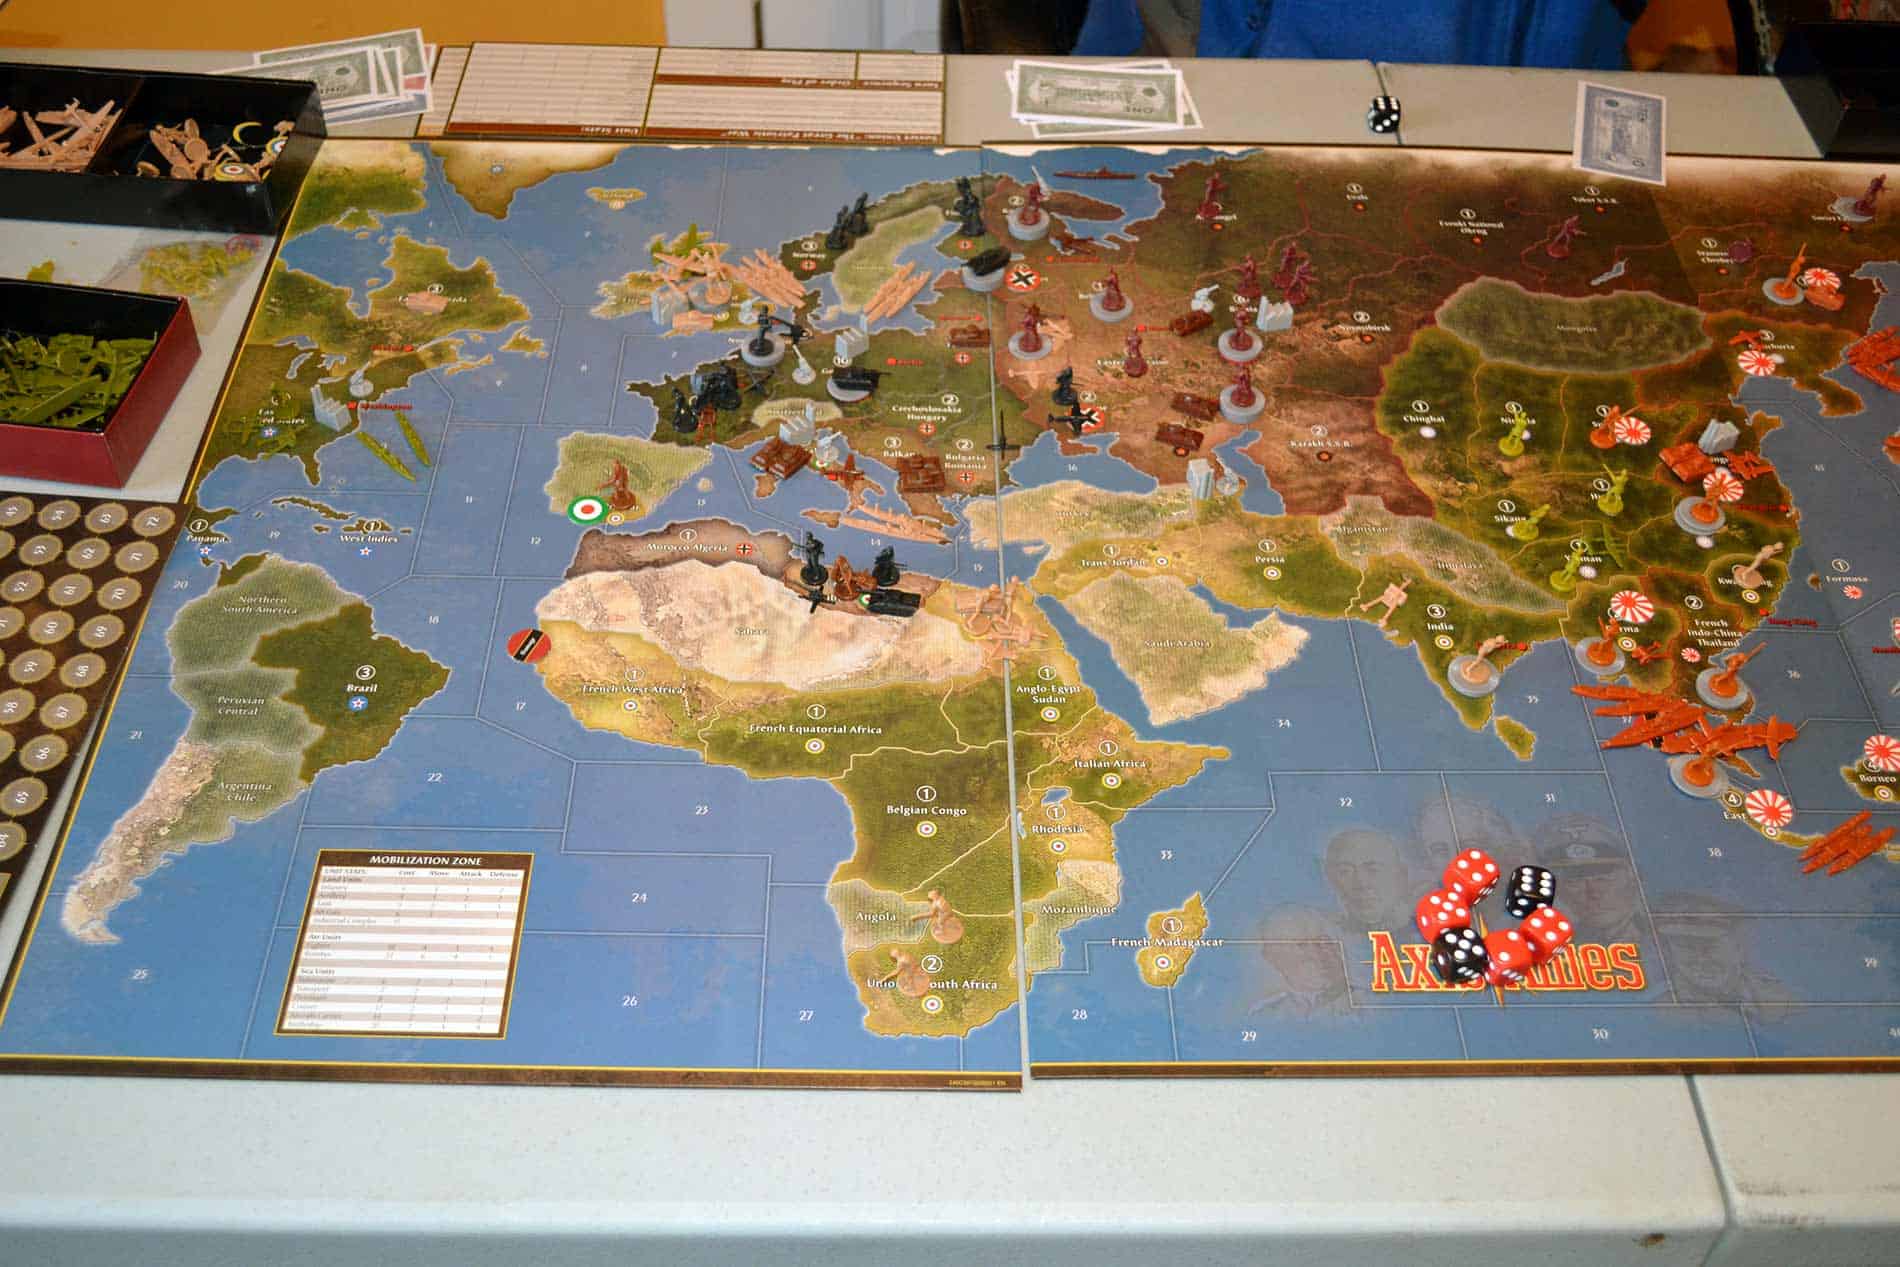 axis & allies board game